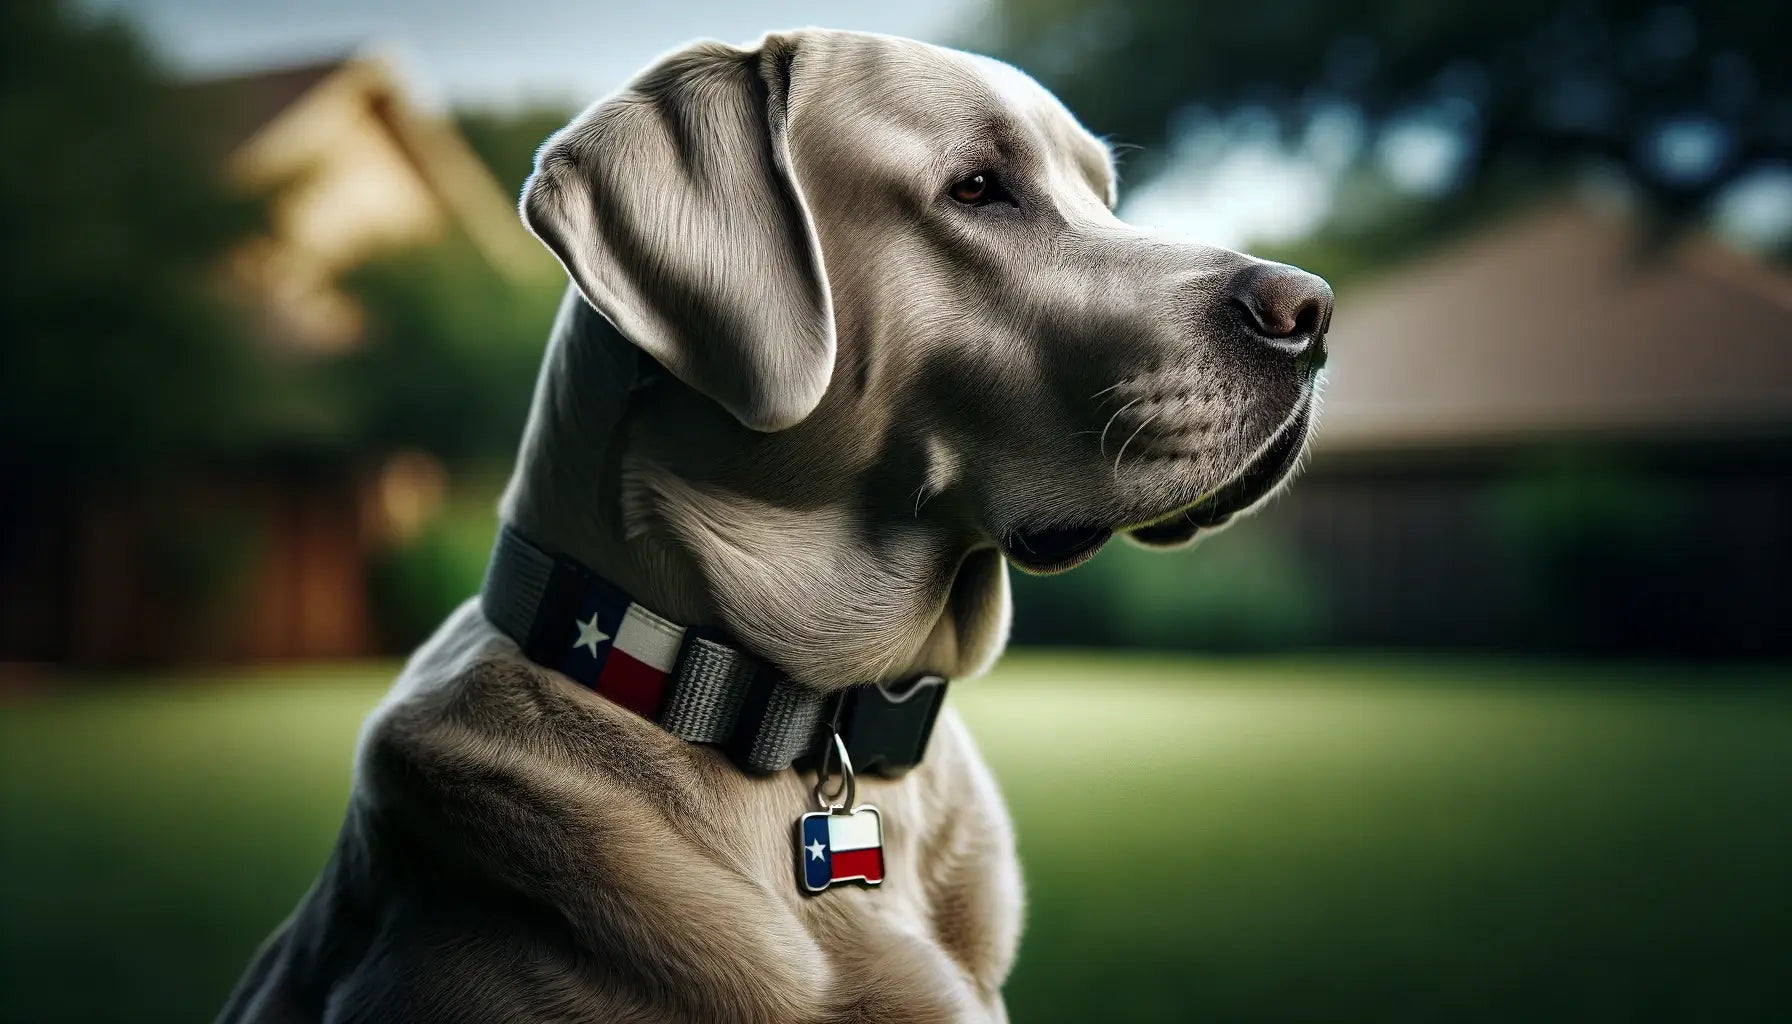 A Silver Lab with a collar featuring a Texas flag, highlighting the dog's strong build and calm composure.